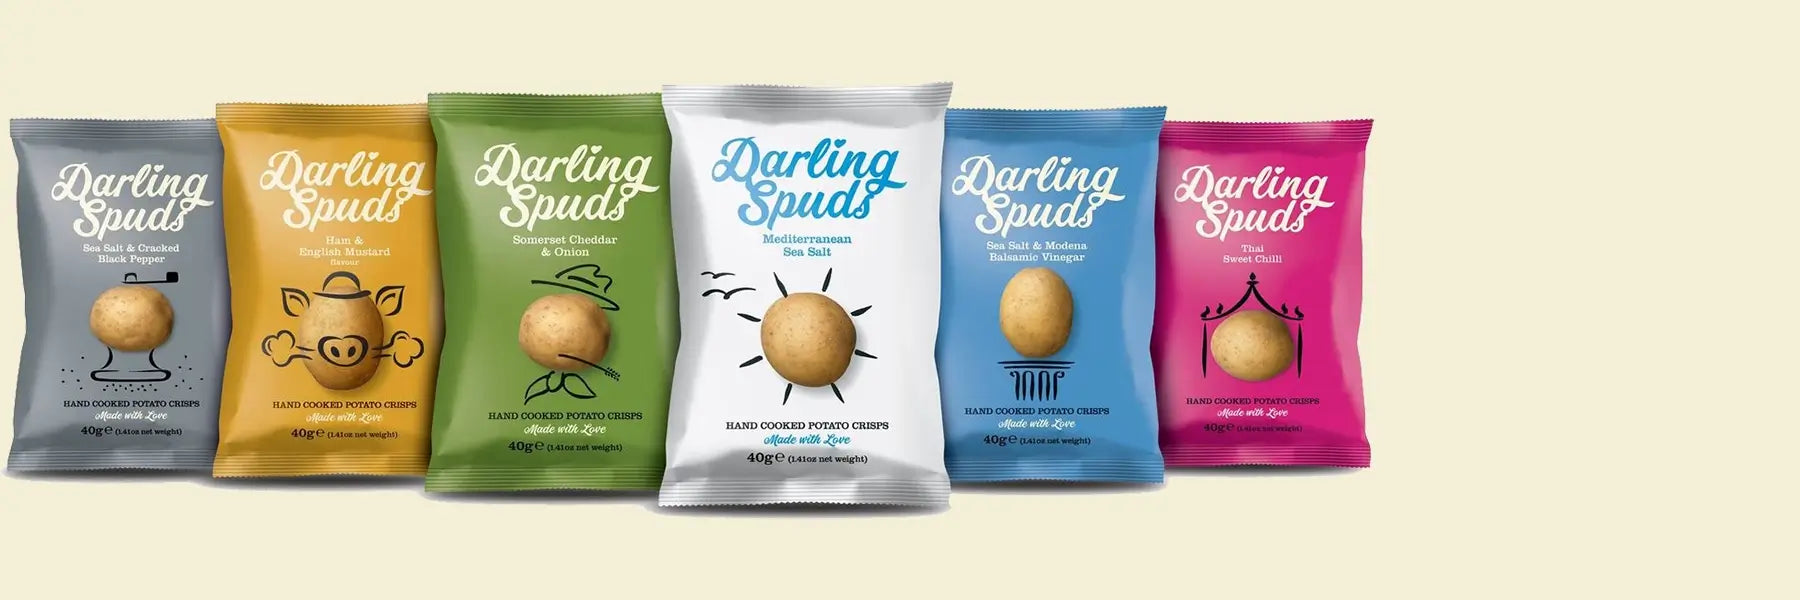 Darling Spuds Crips All Flavours